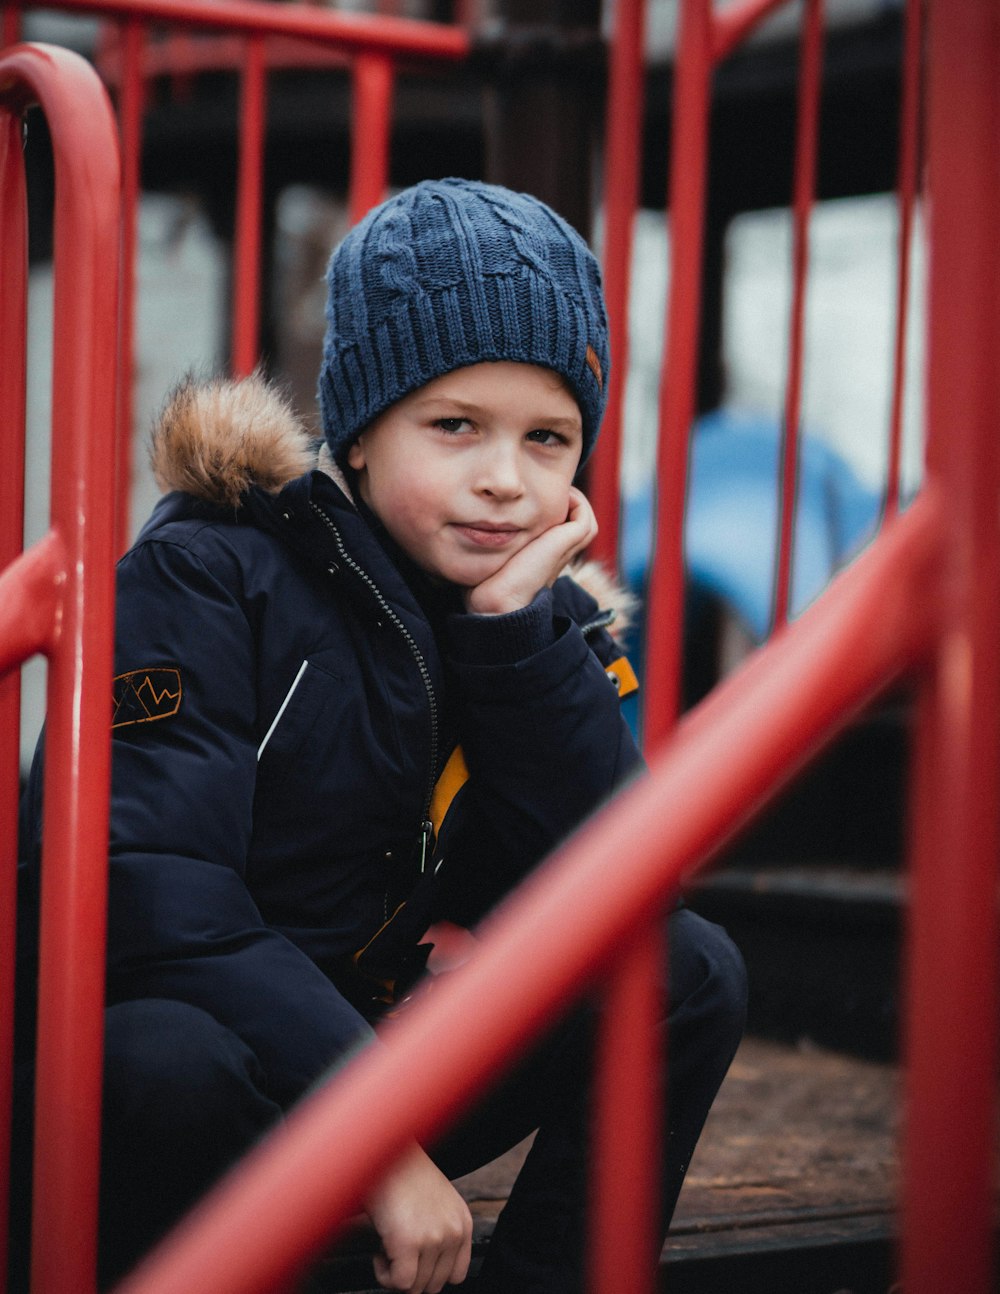 boy in black jacket and blue knit cap standing beside red metal fence during daytime